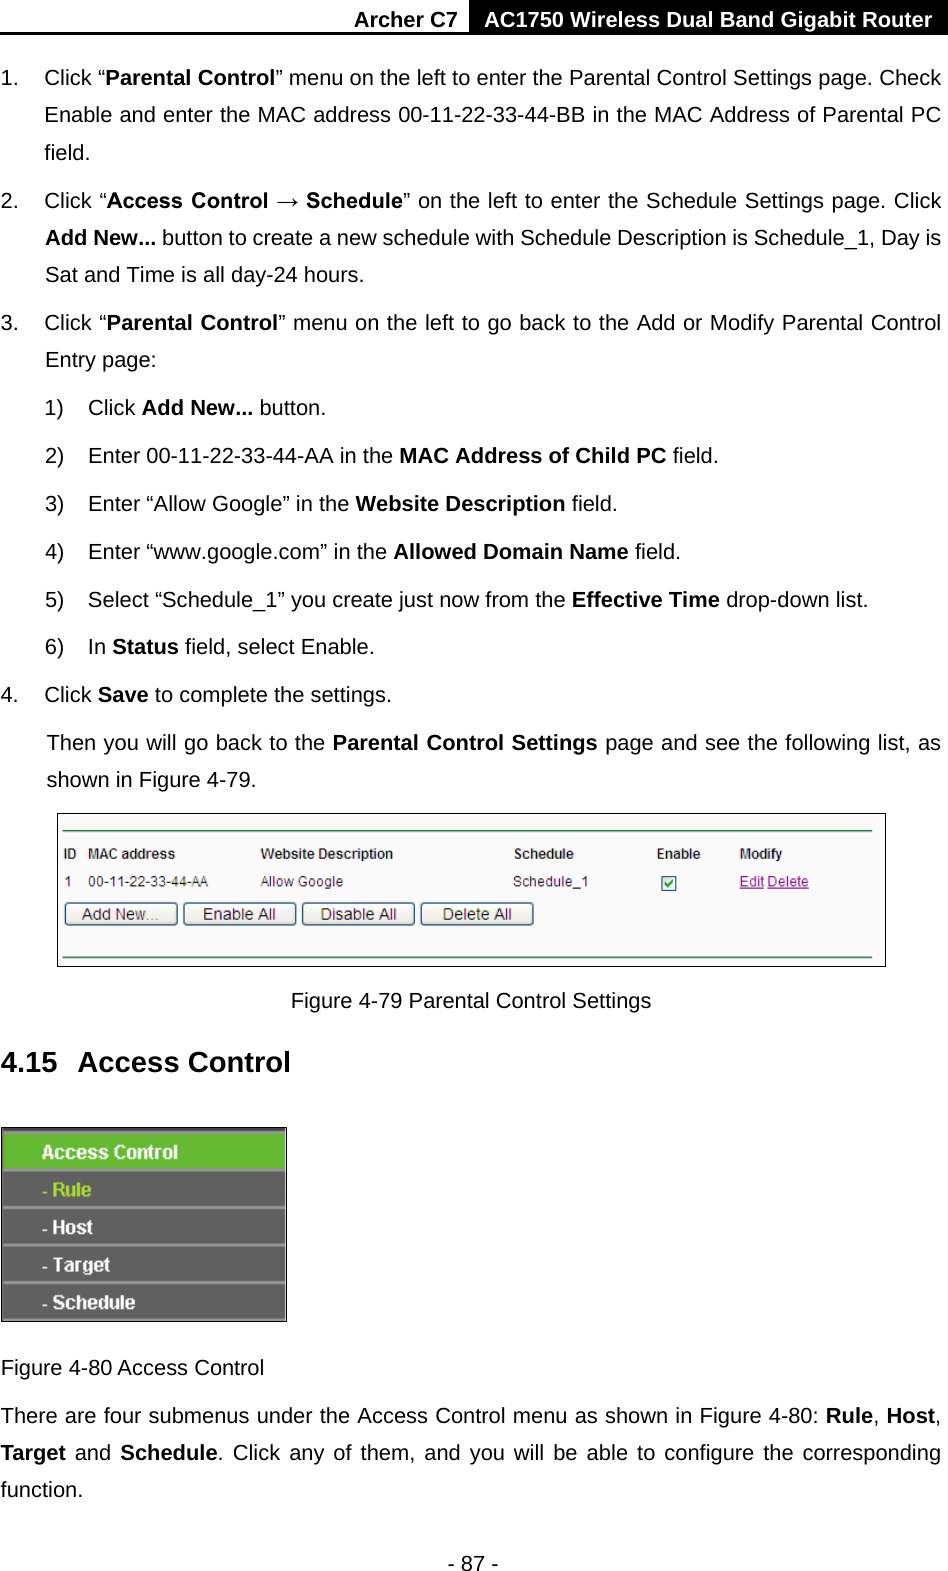 Archer C7 AC1750 Wireless Dual Band Gigabit Router  - 87 - 1. Click “Parental Control” menu on the left to enter the Parental Control Settings page. Check Enable and enter the MAC address 00-11-22-33-44-BB in the MAC Address of Parental PC field.   2. Click “Access Control → Schedule” on the left to enter the Schedule Settings page. Click Add New... button to create a new schedule with Schedule Description is Schedule_1, Day is Sat and Time is all day-24 hours.   3. Click “Parental Control” menu on the left to go back to the Add or Modify Parental Control Entry page:   1) Click Add New... button.   2) Enter 00-11-22-33-44-AA in the MAC Address of Child PC field.   3) Enter “Allow Google” in the Website Description field.   4) Enter “www.google.com” in the Allowed Domain Name field.   5) Select “Schedule_1” you create just now from the Effective Time drop-down list.   6) In Status field, select Enable.   4. Click Save to complete the settings. Then you will go back to the Parental Control Settings page and see the following list, as shown in Figure 4-79.  Figure 4-79 Parental Control Settings 4.15  Access Control  Figure 4-80 Access Control There are four submenus under the Access Control menu as shown in Figure 4-80: Rule, Host, Target and Schedule. Click any of them, and you will be able to configure the corresponding function. 